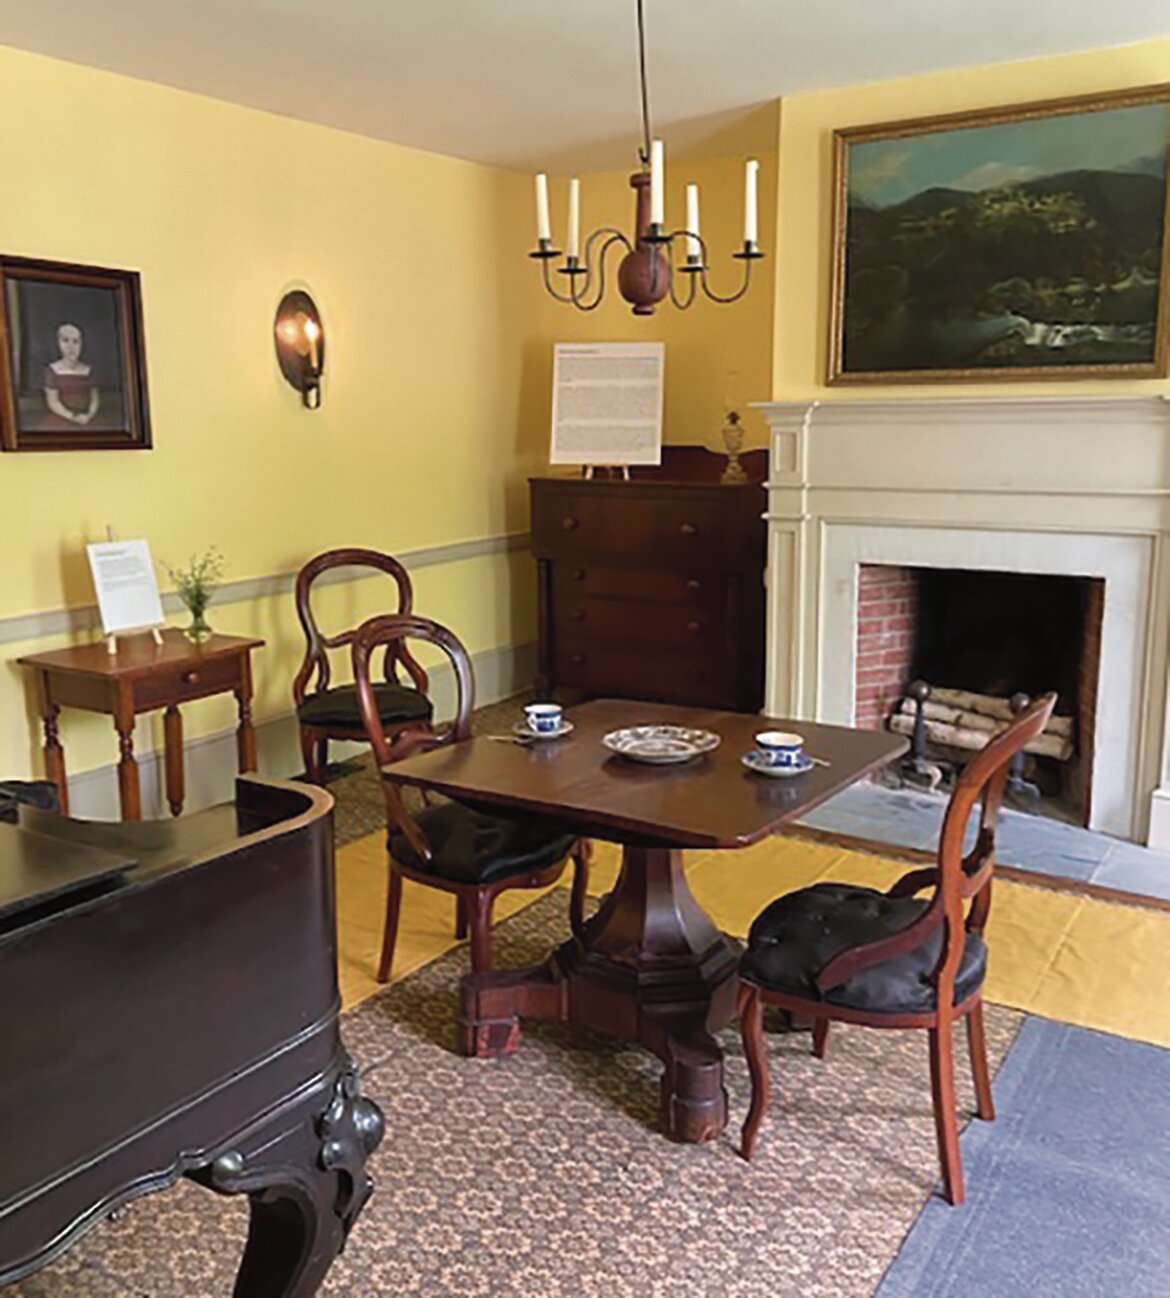 The parlor where prominent Andes families dined and entertained guests in the 1800. The rug was found at the Pleasant Valley Meeting House and is one of the first machine-made reversible rugs, circa 1800s.